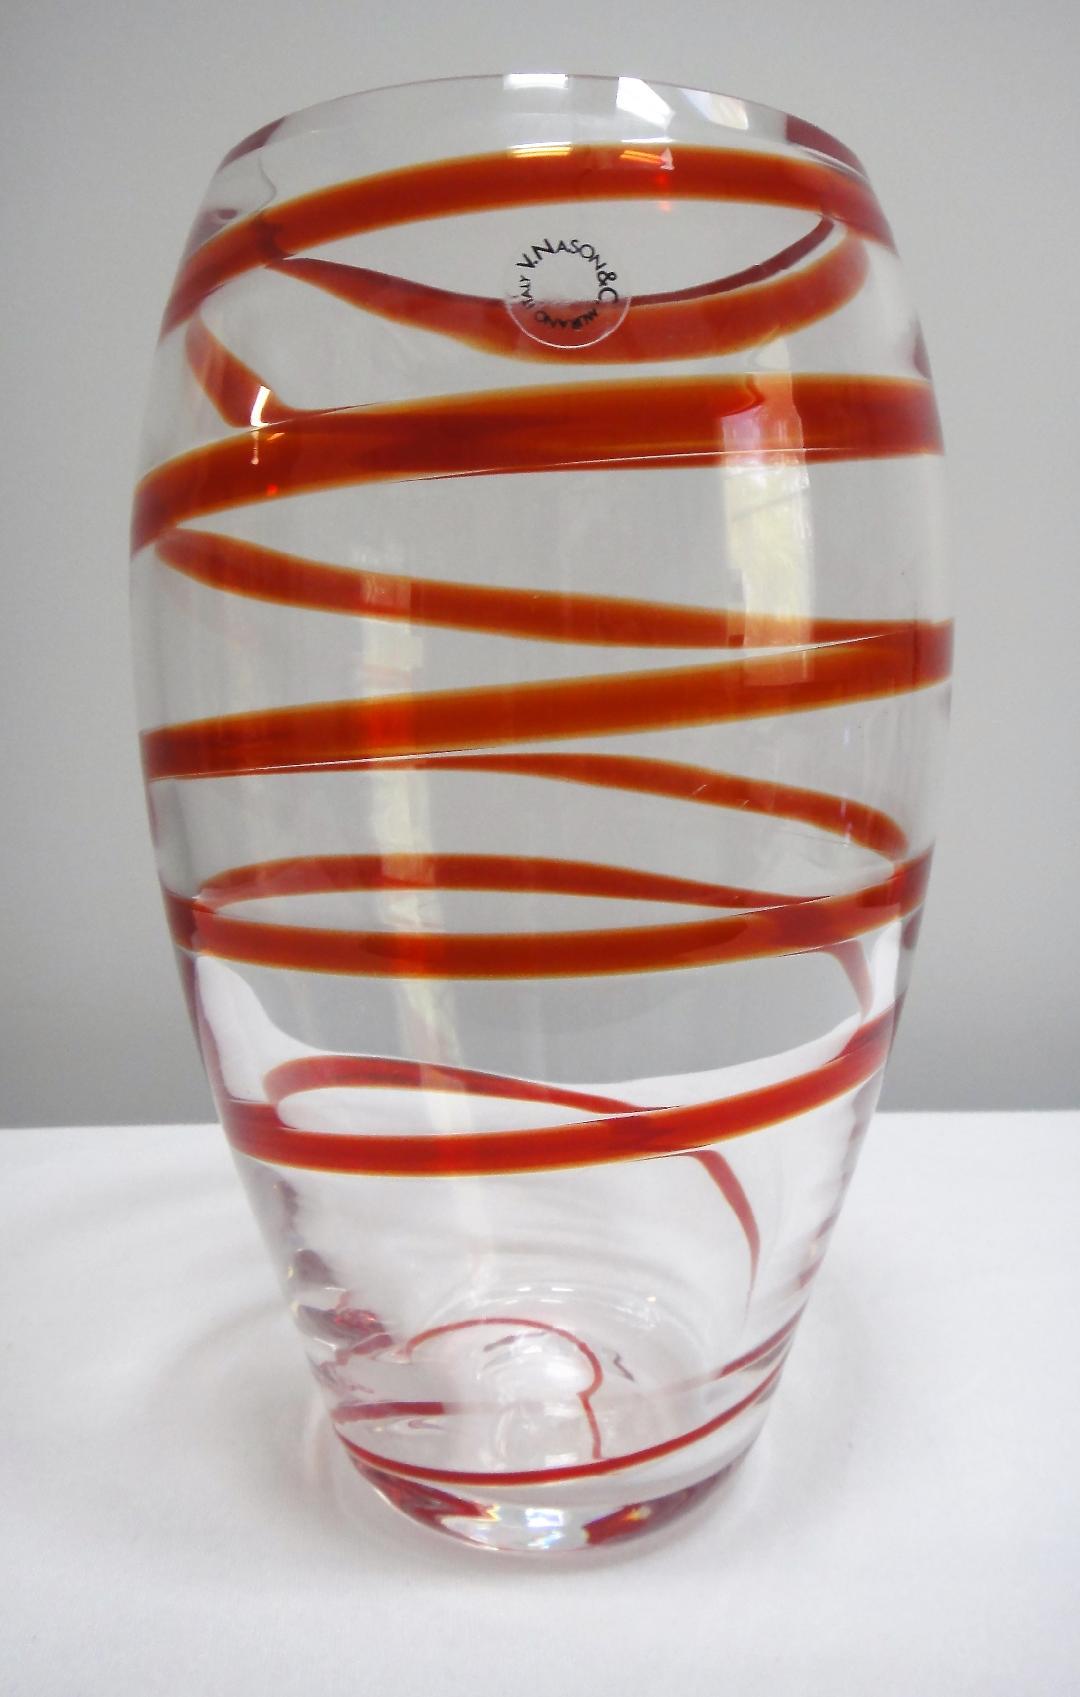 V. Nasson & C. Murano Art Glass Vase with Red Spiral Stripes Offered for sale is a swirled Italian art glass vase by V. Nasson & C. Vincenzo Nason established his glassworks, Vincenzo Nason & Cie (VNC) on the island of Murano, Venice, Italy in 1967,